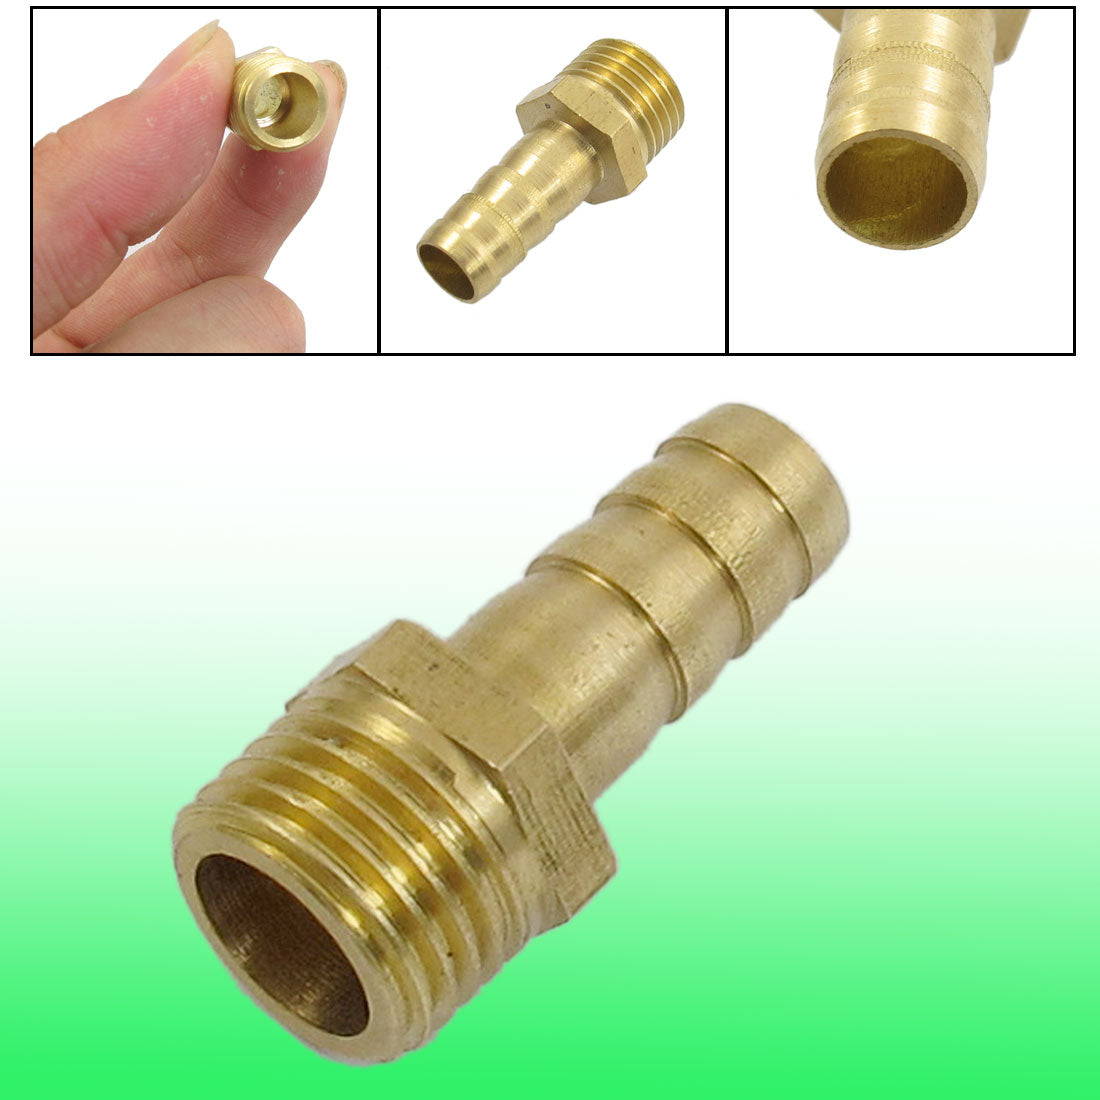 uxcell Uxcell 8mm x 13mm Fuel Gas Hose Barb Male Thread Straight Coupling Fitting